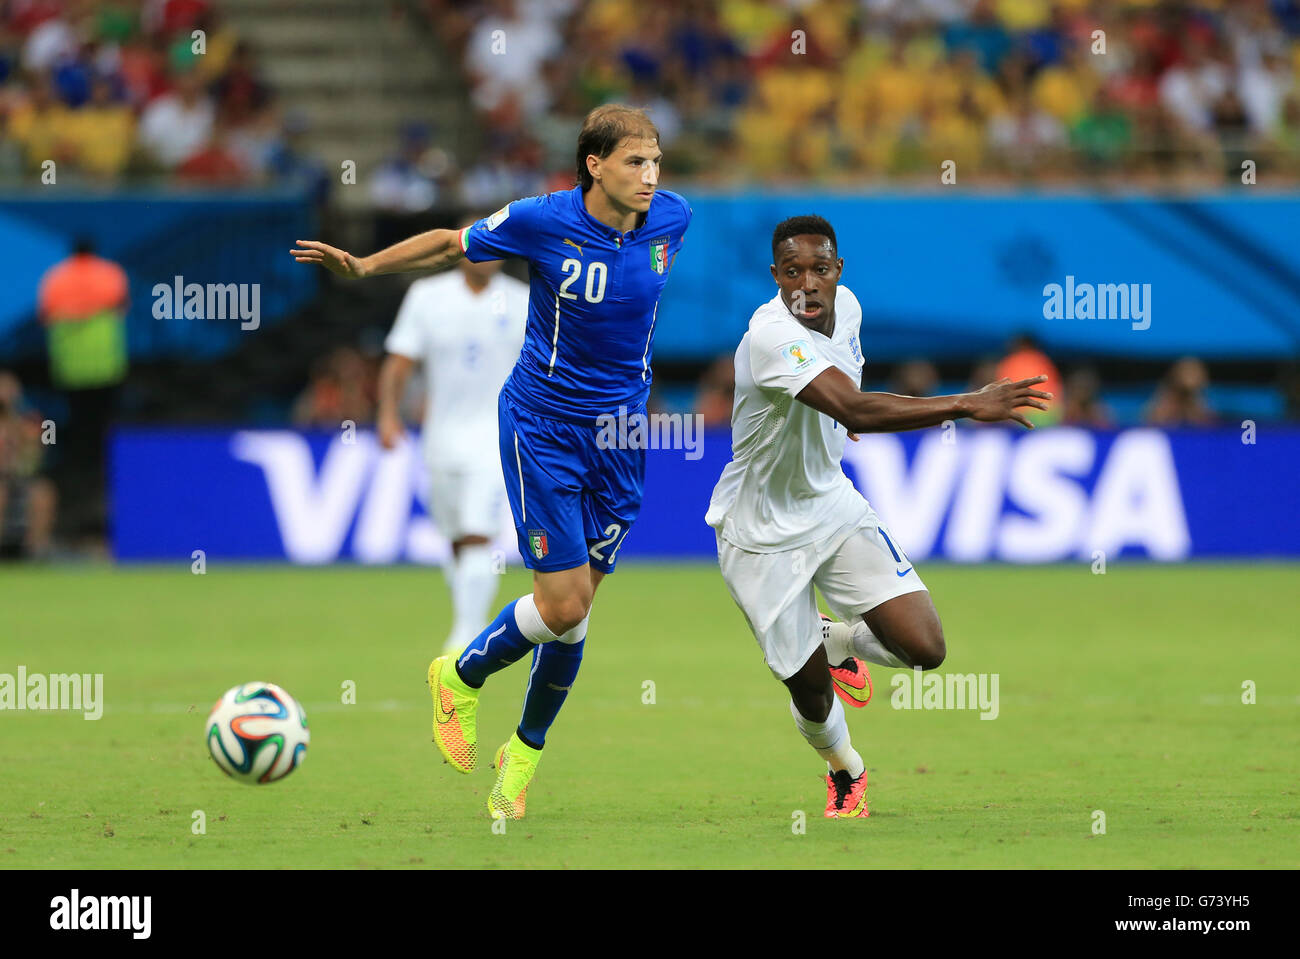 England's Danny Welbeck (right) and Italy's Gabriel Paletta battle for the ball during the FIFA World Cup, Group D match at the Arena da Amazonia, Manaus, Brazil. Stock Photo